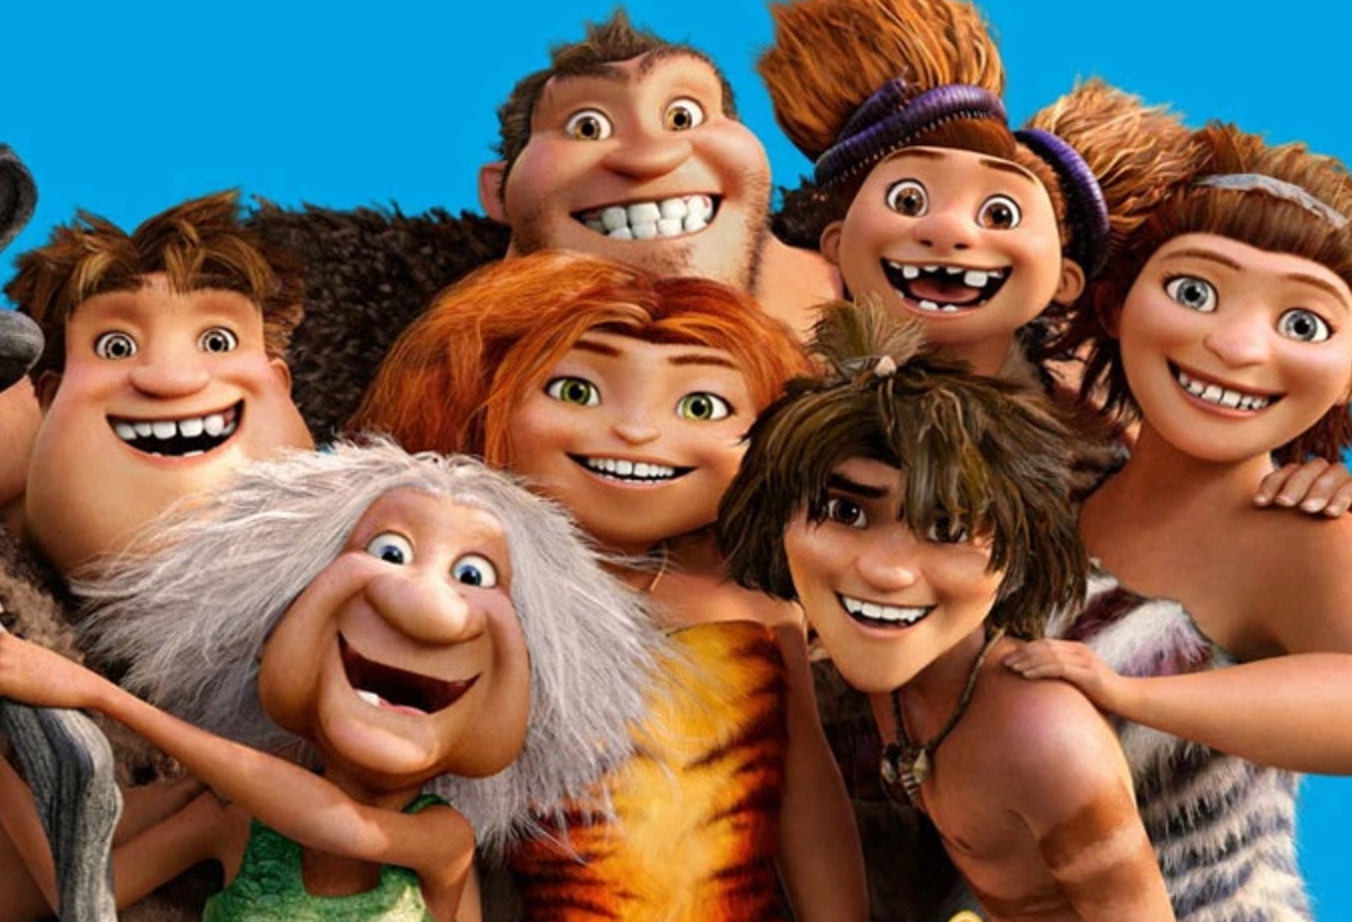 2. The Croods - wide 4